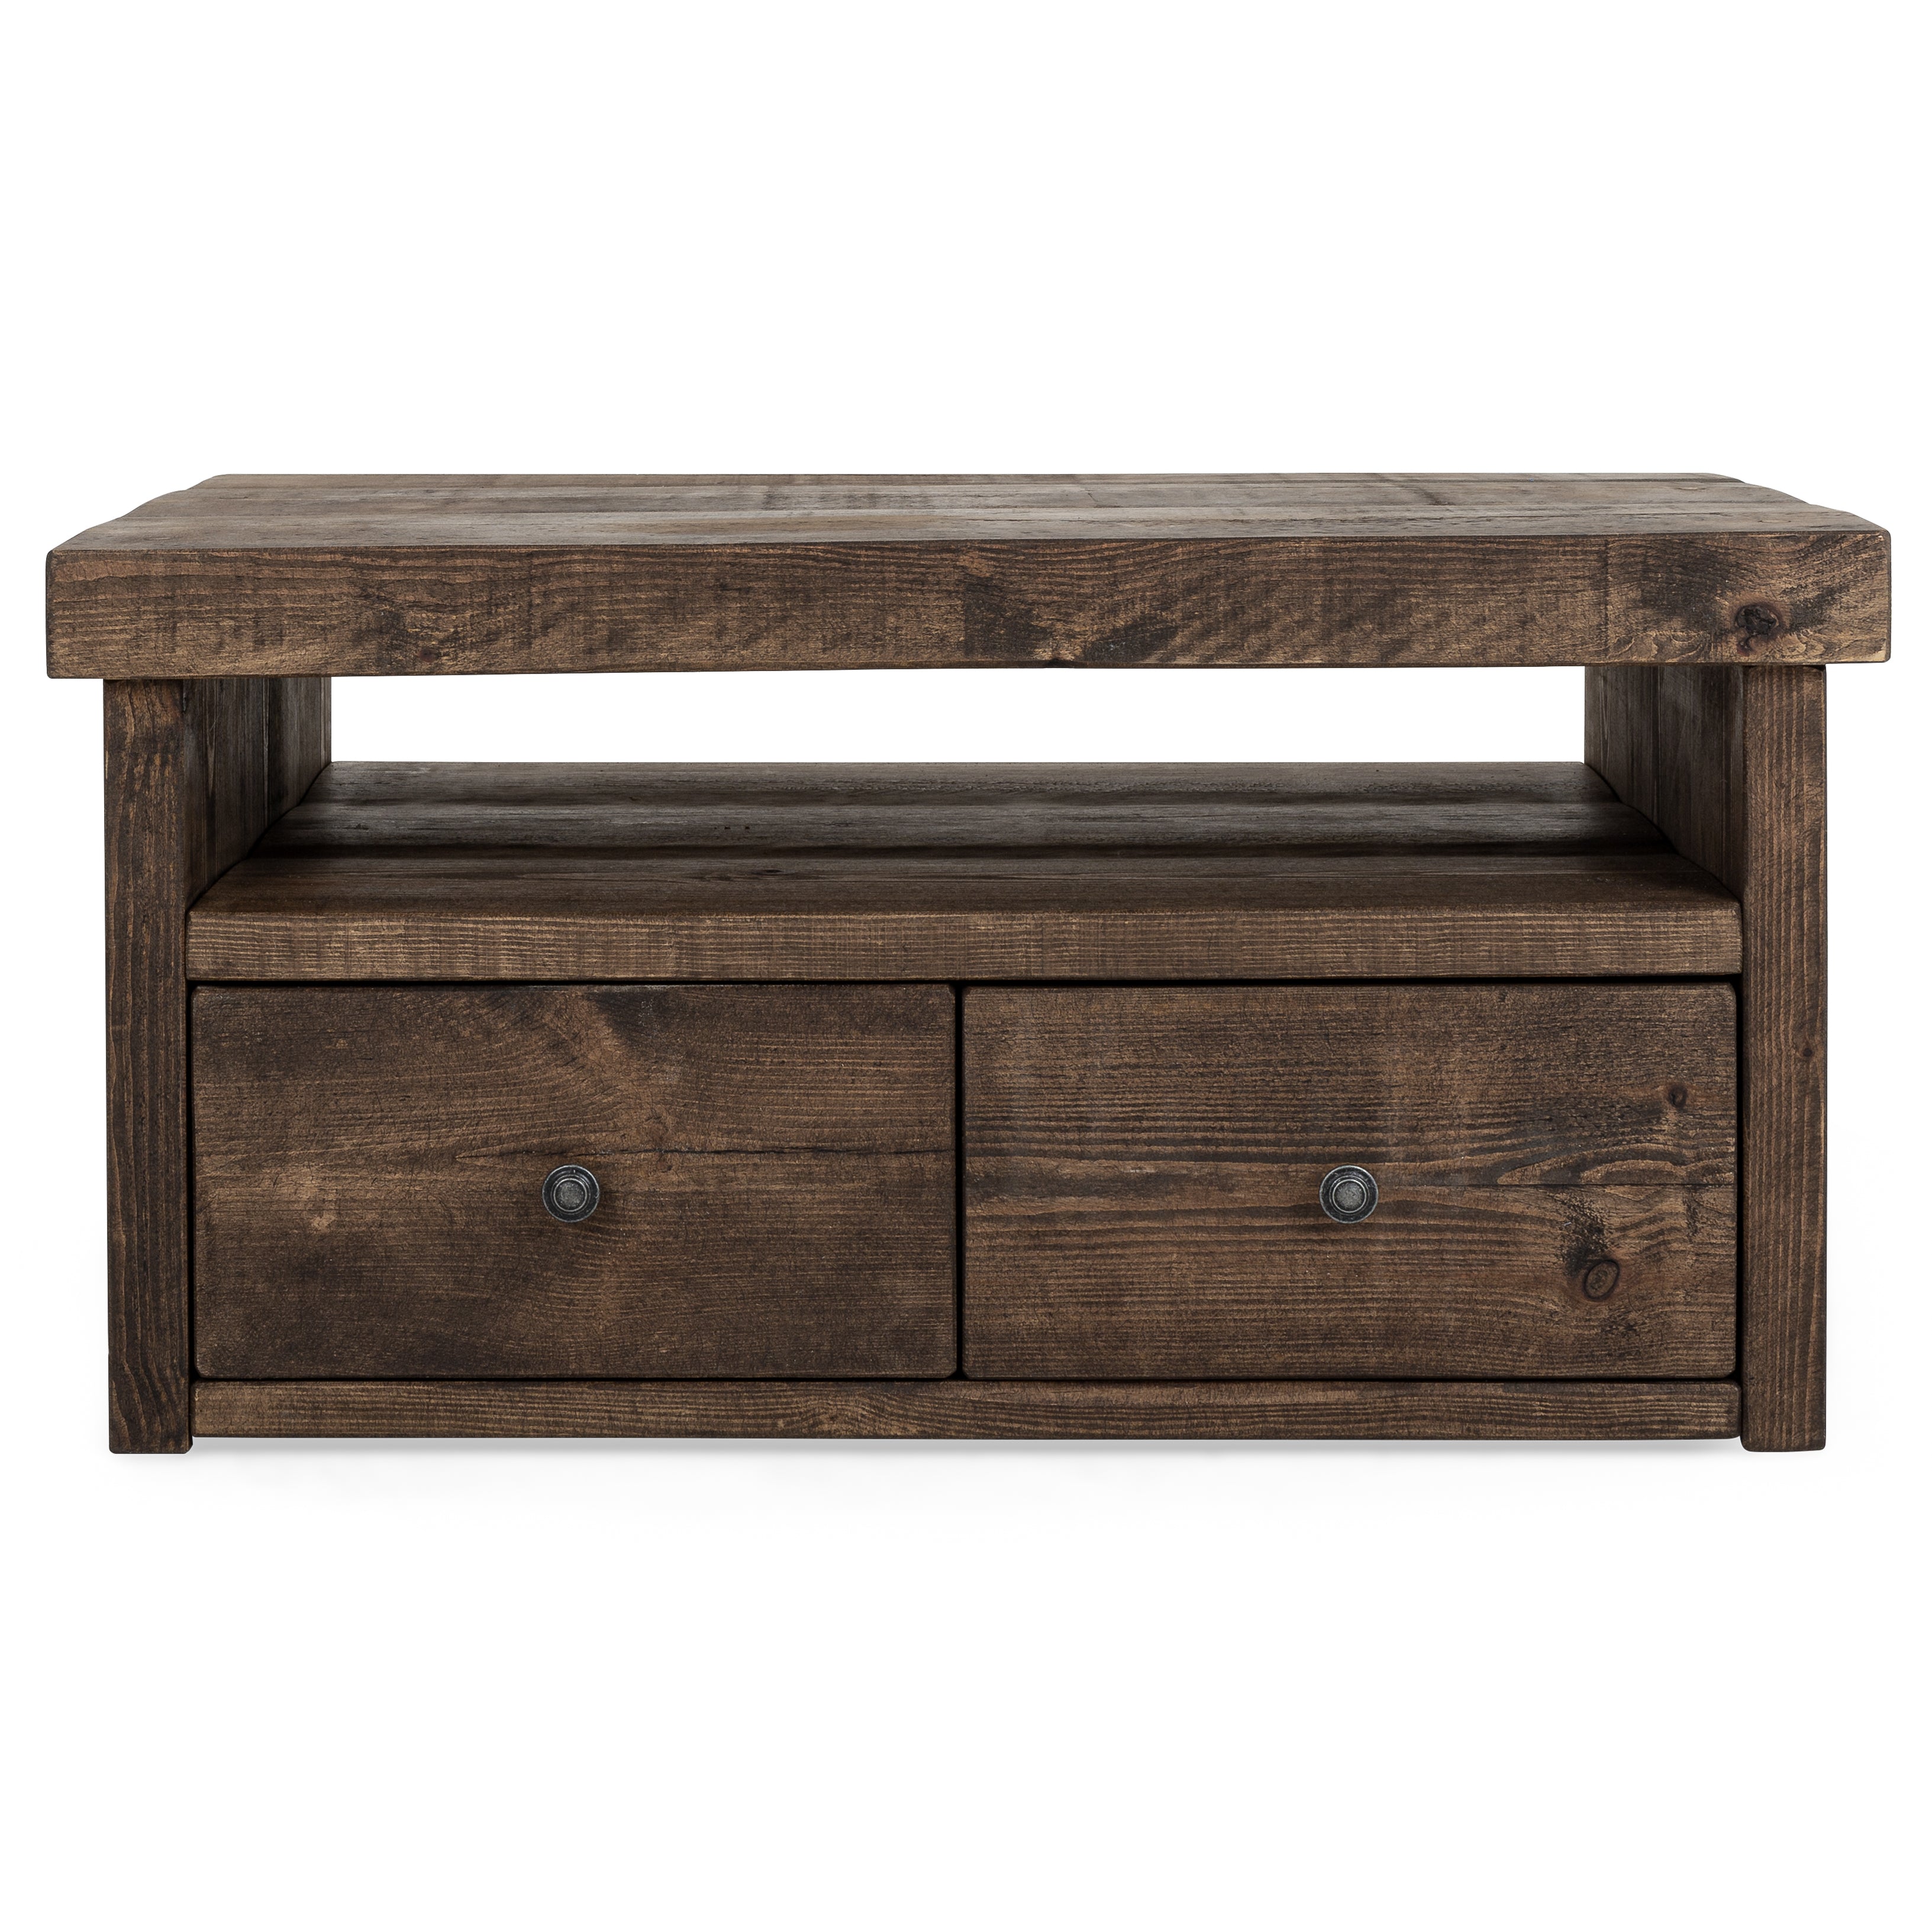 Derwent Coffee Table With Drawers